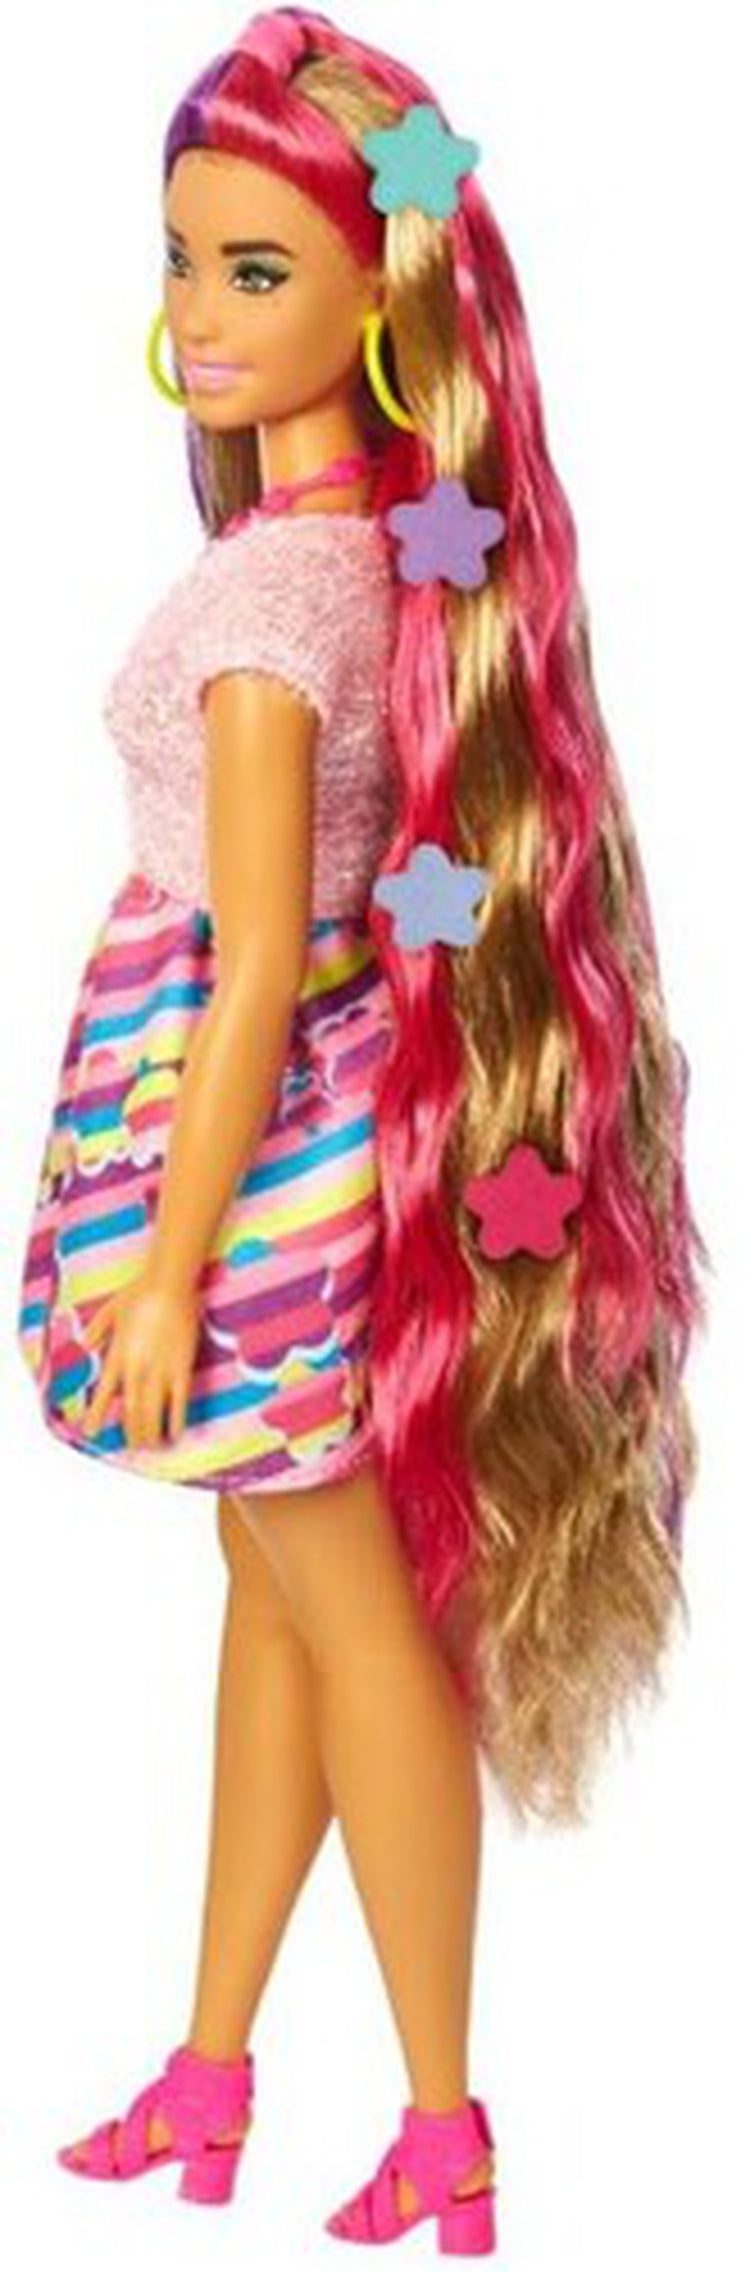 Mattel - Barbie Totally Hair Doll Flower, Brunette with Purple and Pink Streaks